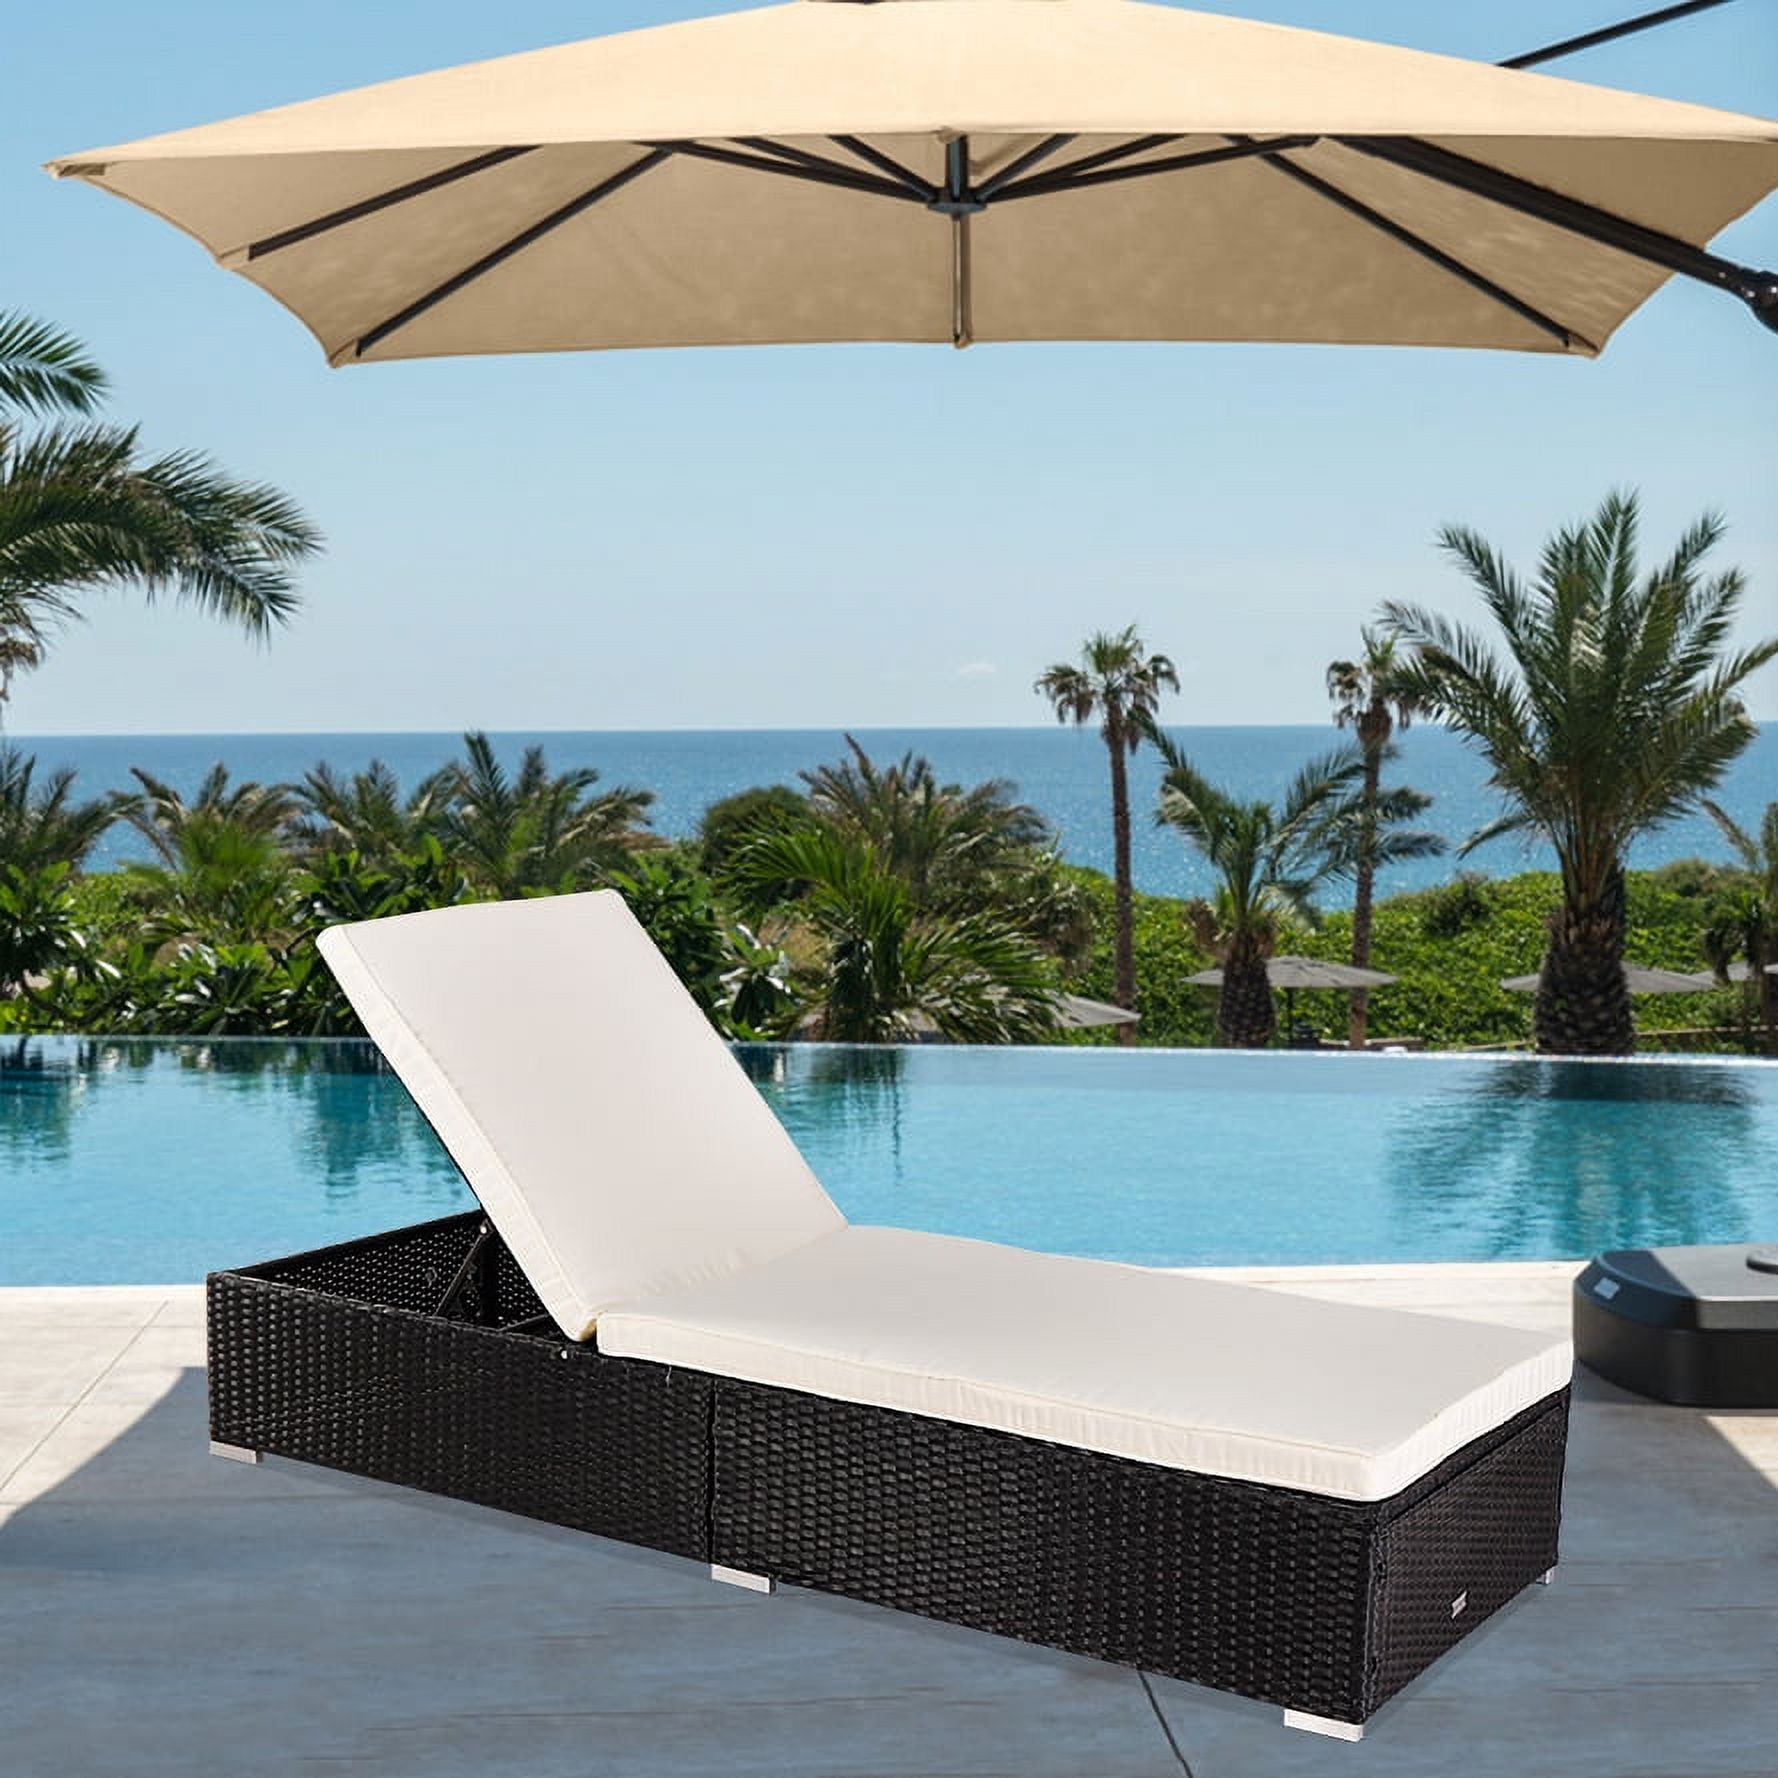 Outdoor Patio Furniture Set Chaise Lounge, Patio Cushioned Reclining Rattan Lounge Chair Chaise Couch with Removable Cushion, 5-Position Adjustable Back, Lounger Chair for Poolside Garden,1PC, Q17569 - image 1 of 10